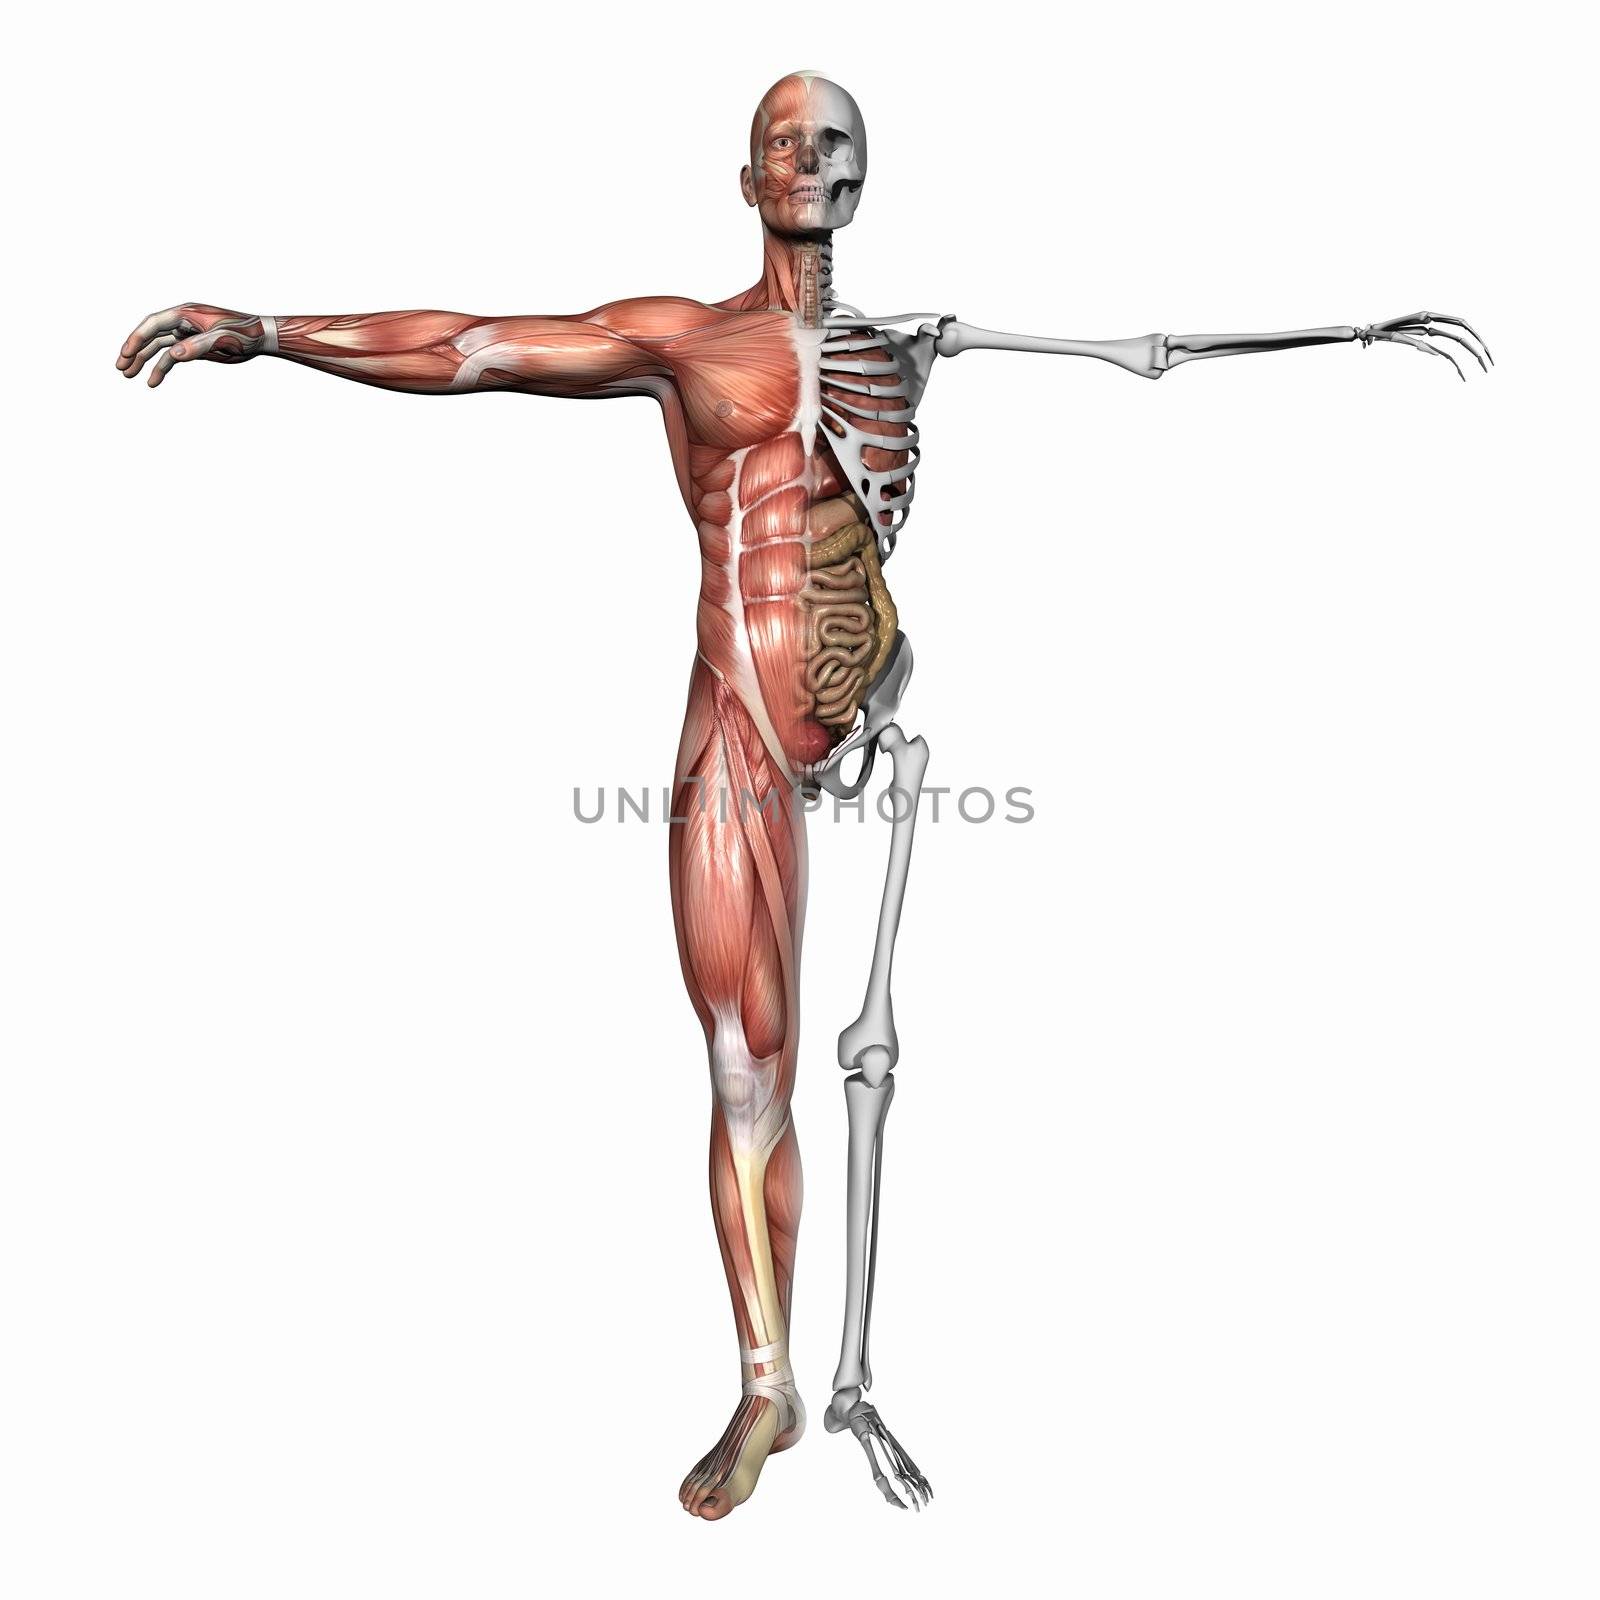 High resolution 3D illustration of a human skeleton. Isolated on white background